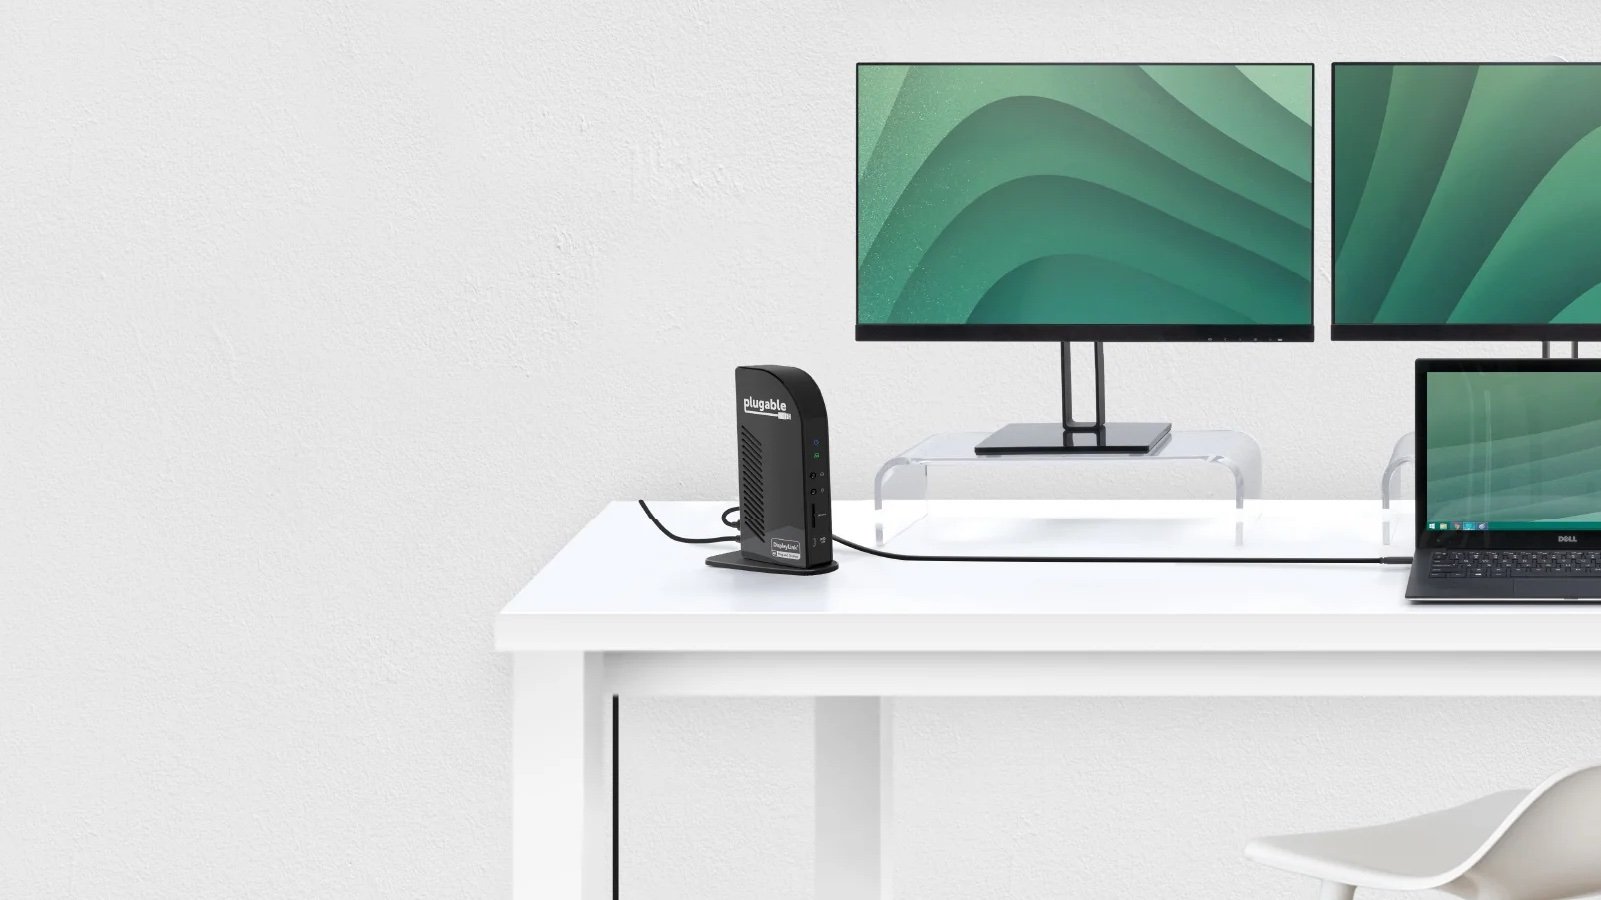 Plugable USB-C Triple Display Docking Station perfectly combines versatility and comfort